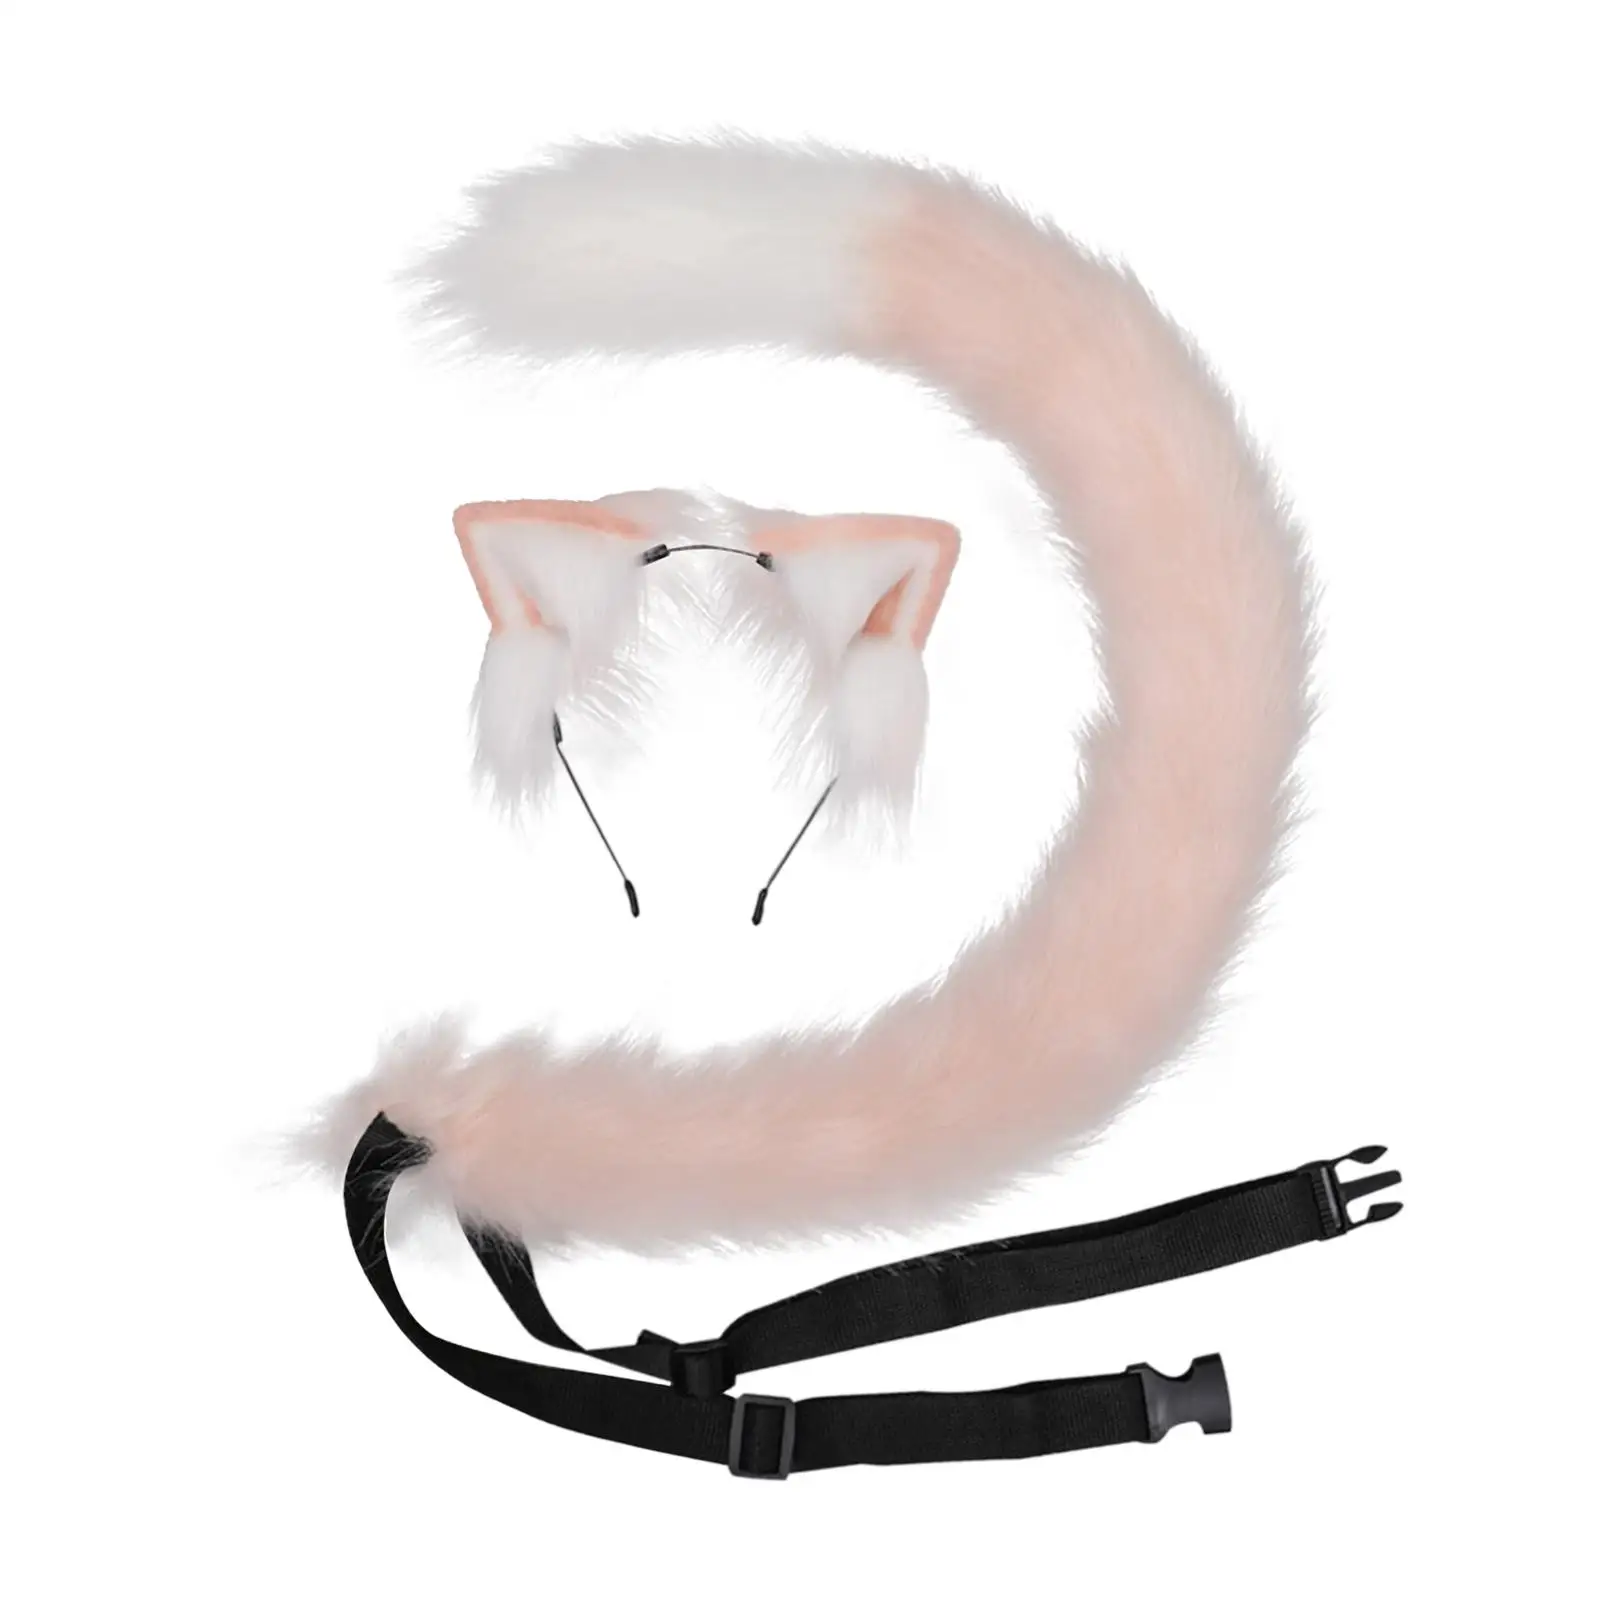 Plush Faux Fur Cat Ears and Tail Set Fancy Dress Costume Headpiece for Cosplay Animal Themed Parties Stage Shows Halloween Party